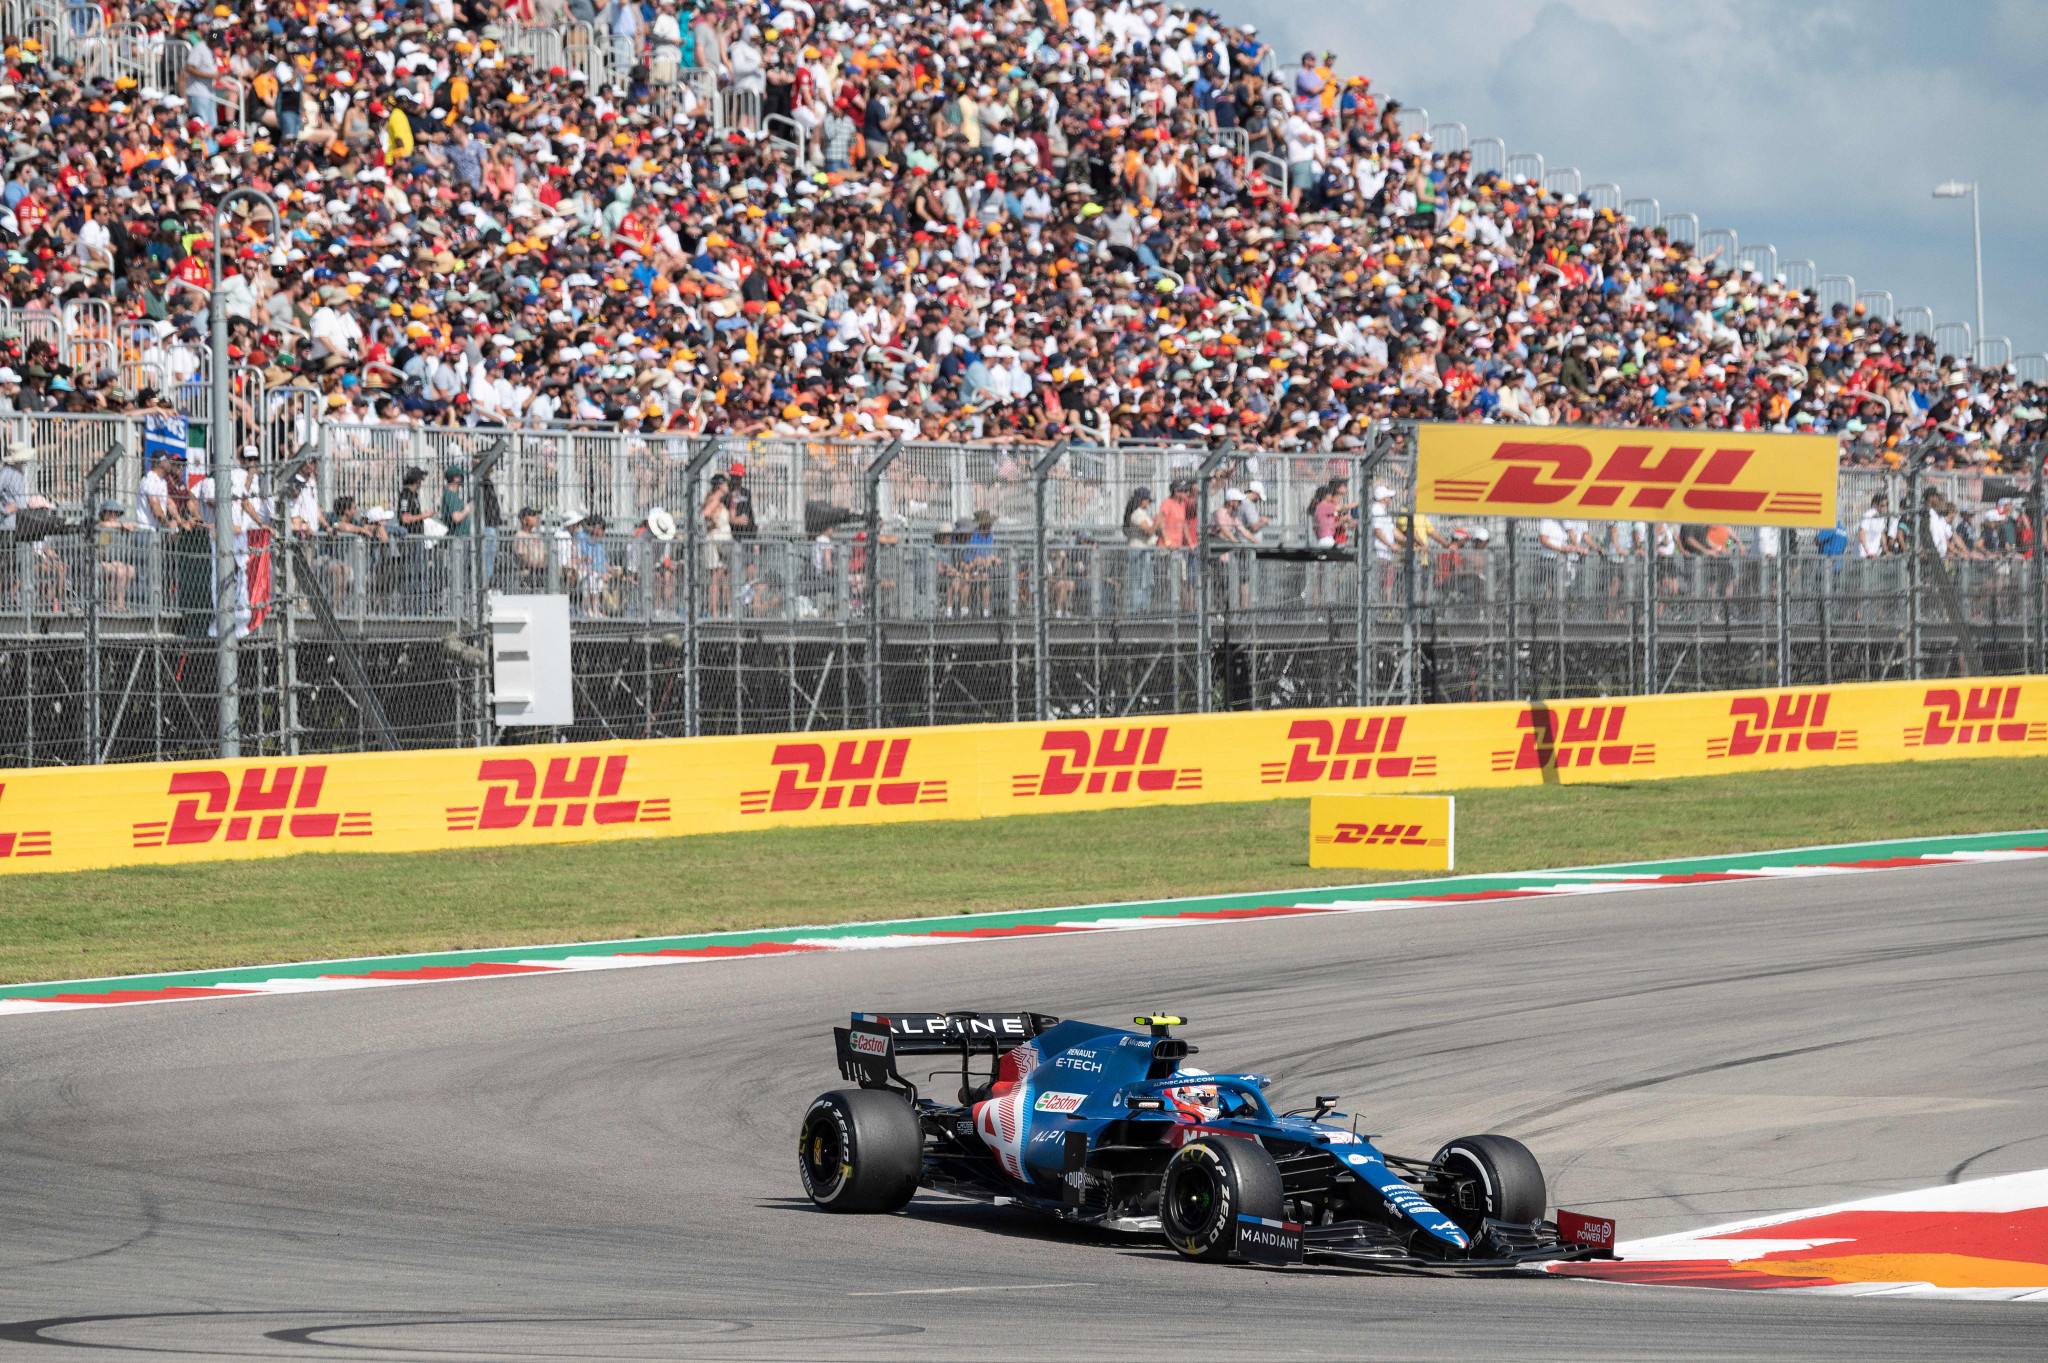 COTA is aiming to make an environmentally friendly impact at the United States Grand Prix ©Getty Images